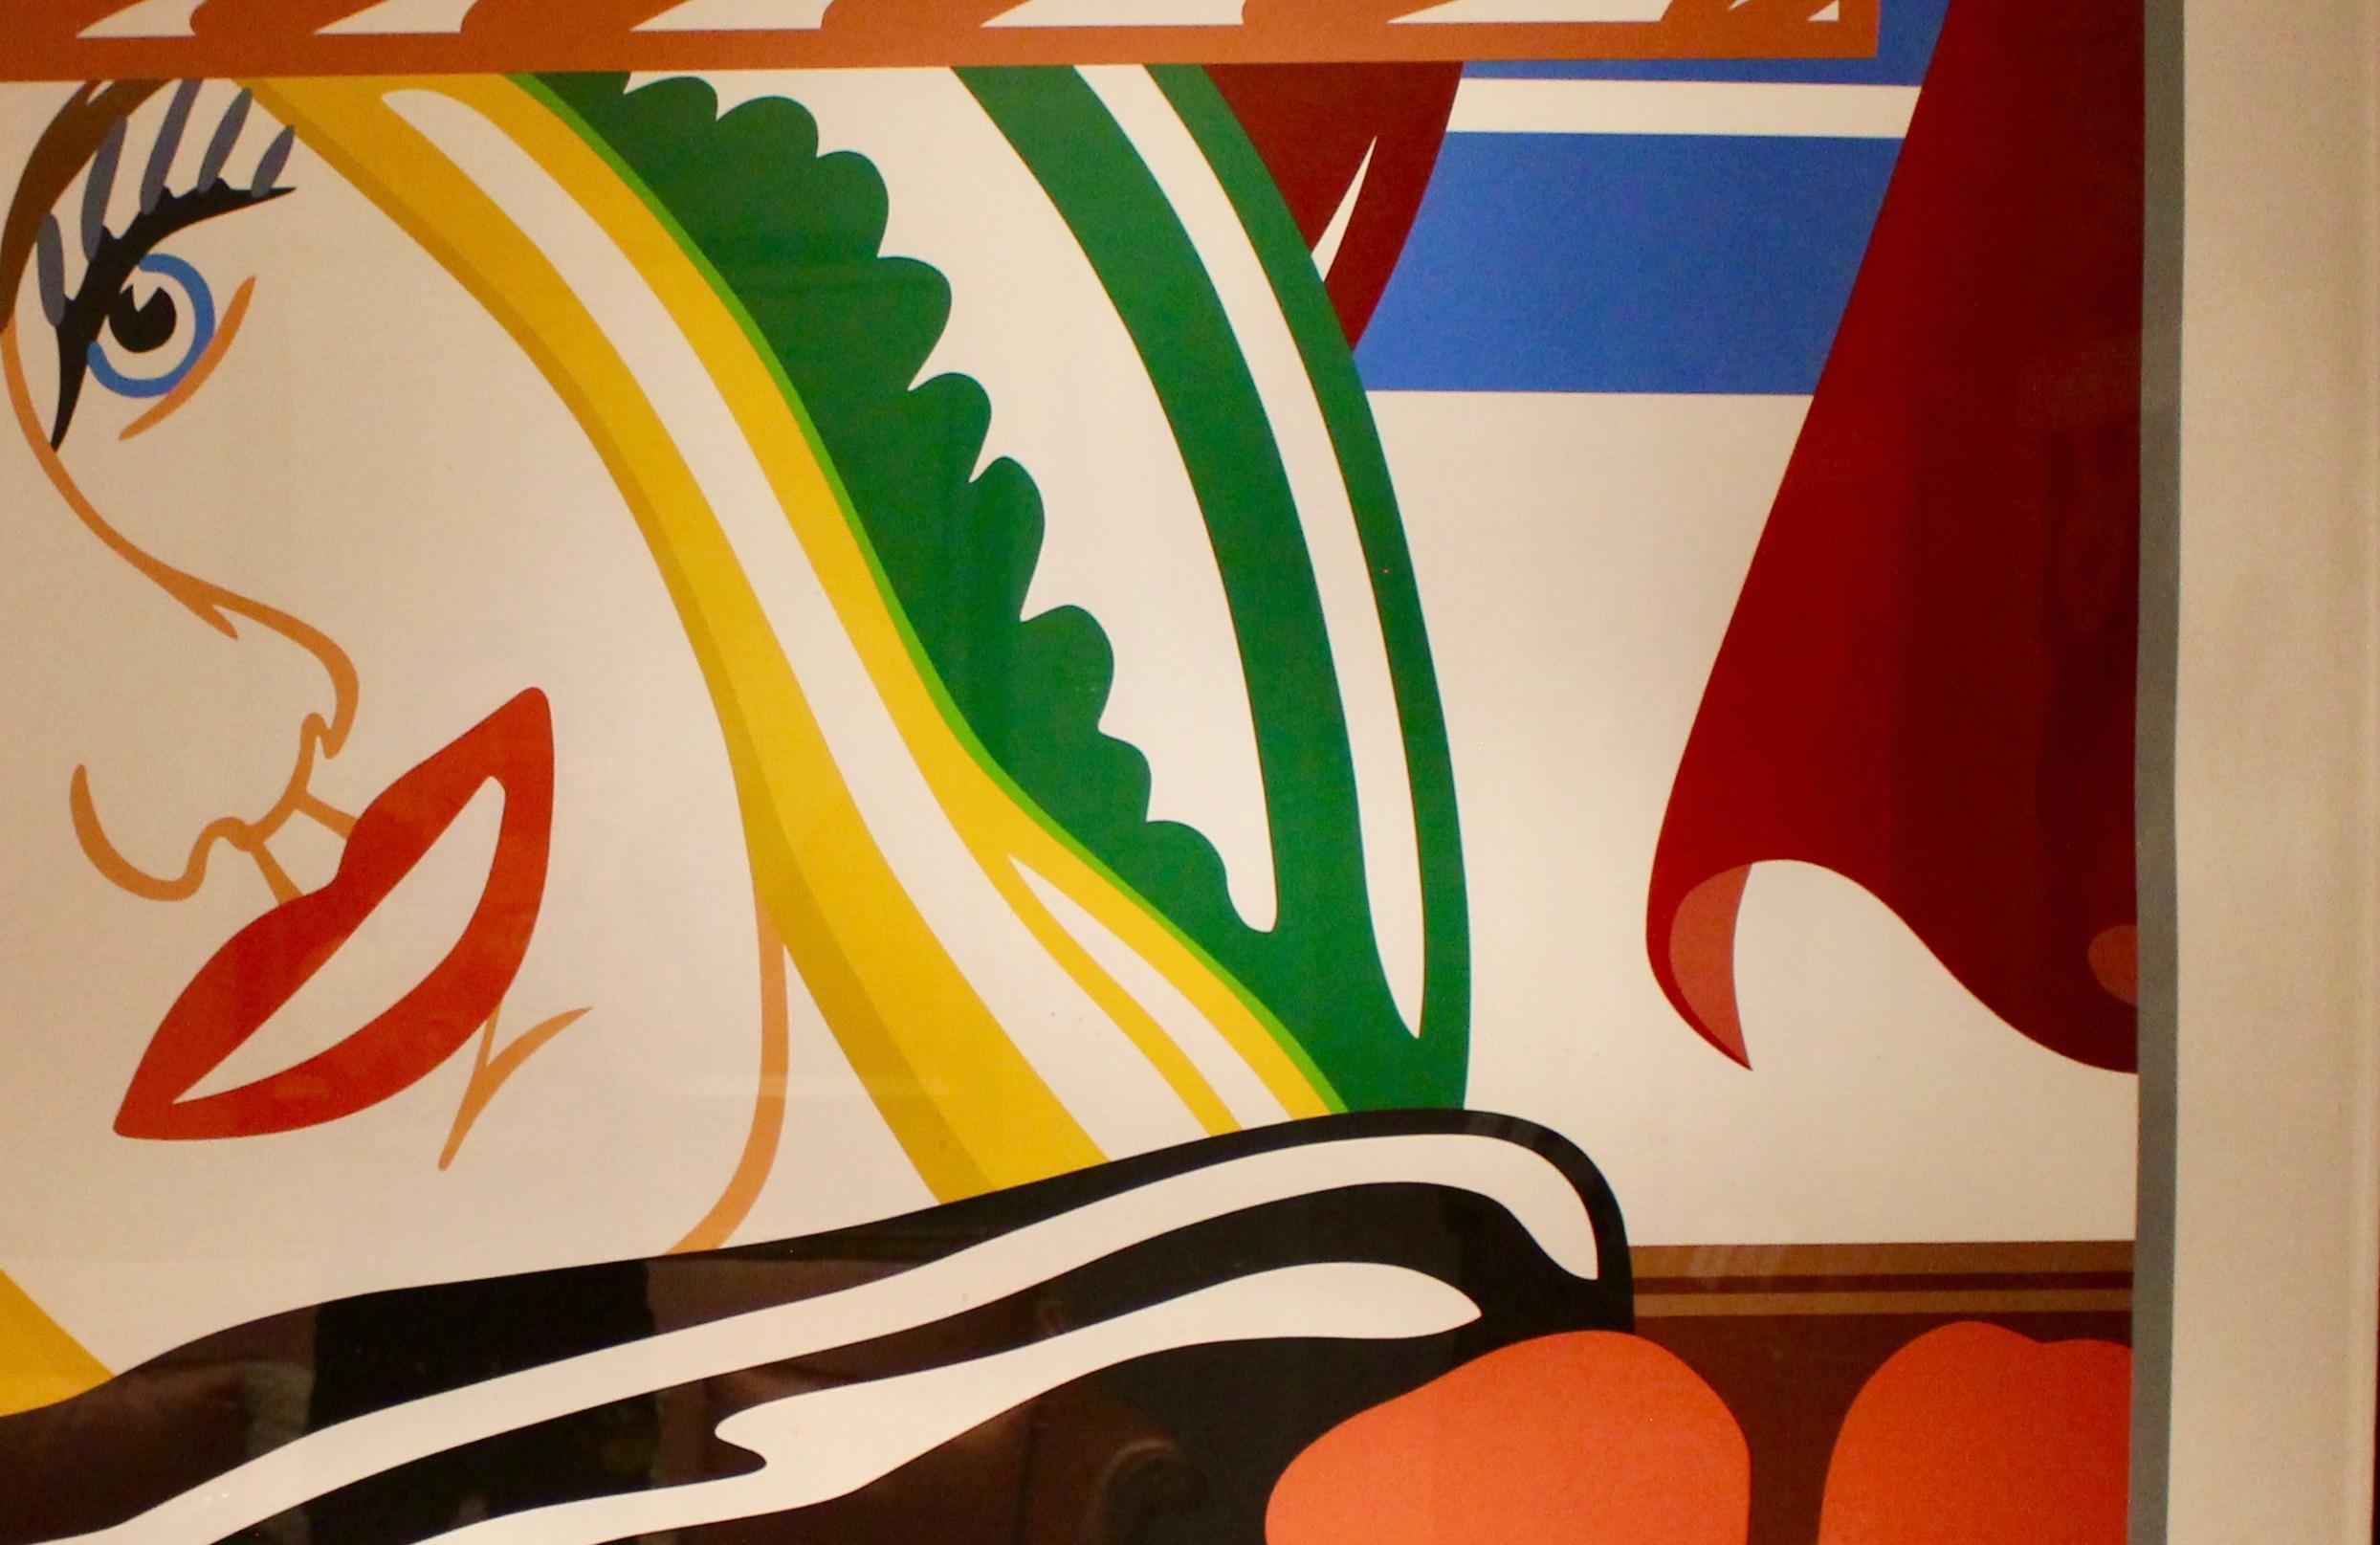 Screenprint bedroom face #41 in colors on museum board. Tom Wesselmann (1931-2004). Signed in pencil 32/100.